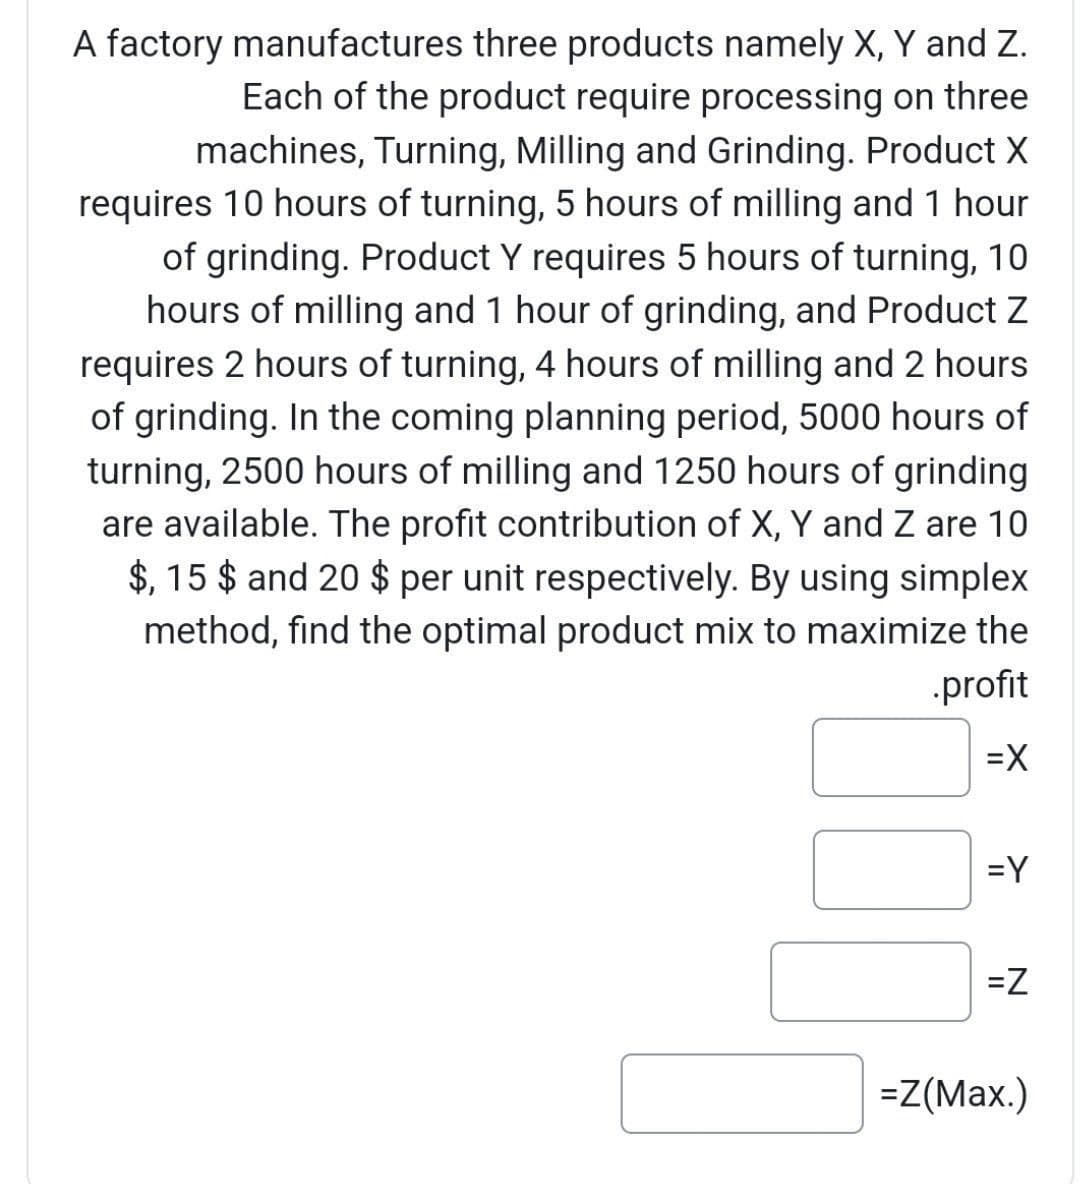 A factory manufactures three products namely X, Y and Z.
Each of the product require processing on three
machines, Turning, Milling and Grinding. Product X
requires 10 hours of turning, 5 hours of milling and 1 hour
of grinding. Product Y requires 5 hours of turning, 10
hours of milling and 1 hour of grinding, and Product Z
requires 2 hours of turning, 4 hours of milling and 2 hours
of grinding. In the coming planning period, 5000 hours of
turning, 2500 hours of milling and 1250 hours of grinding
are available. The profit contribution of X, Y and Z are 10
$, 15 $ and 20 $ per unit respectively. By using simplex
method, find the optimal product mix to maximize the
profit
=X
=Y
=Z
=Z(Max.)
